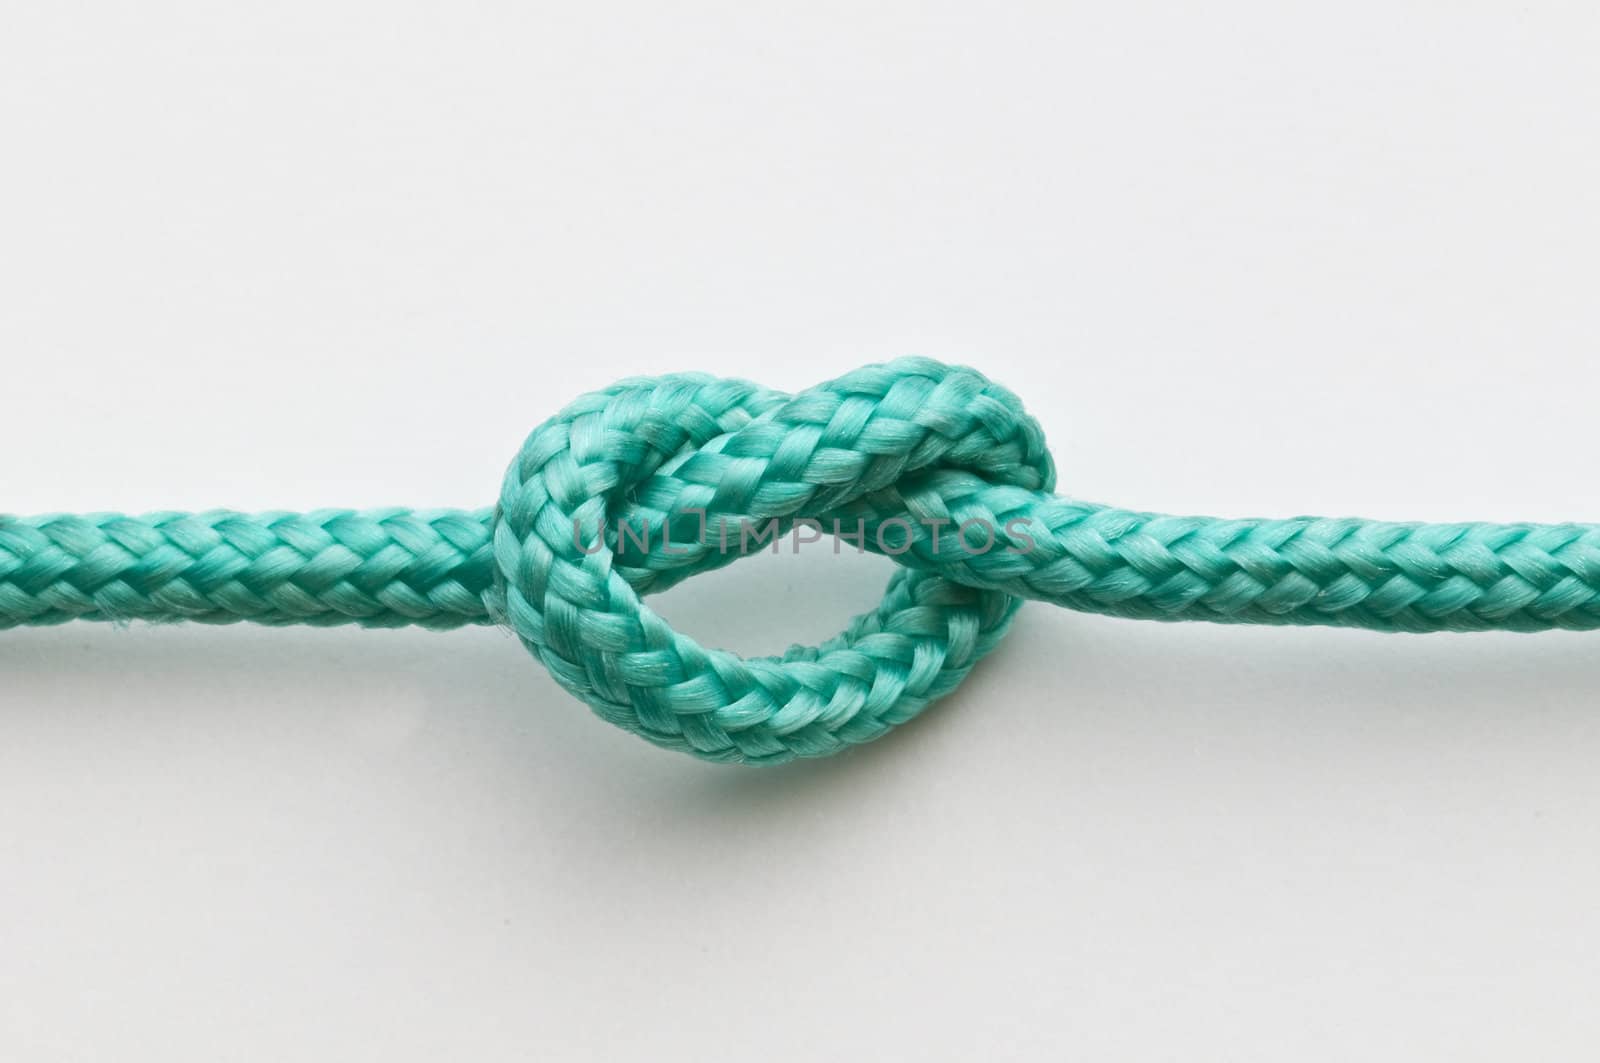 A simple knot on a green rope